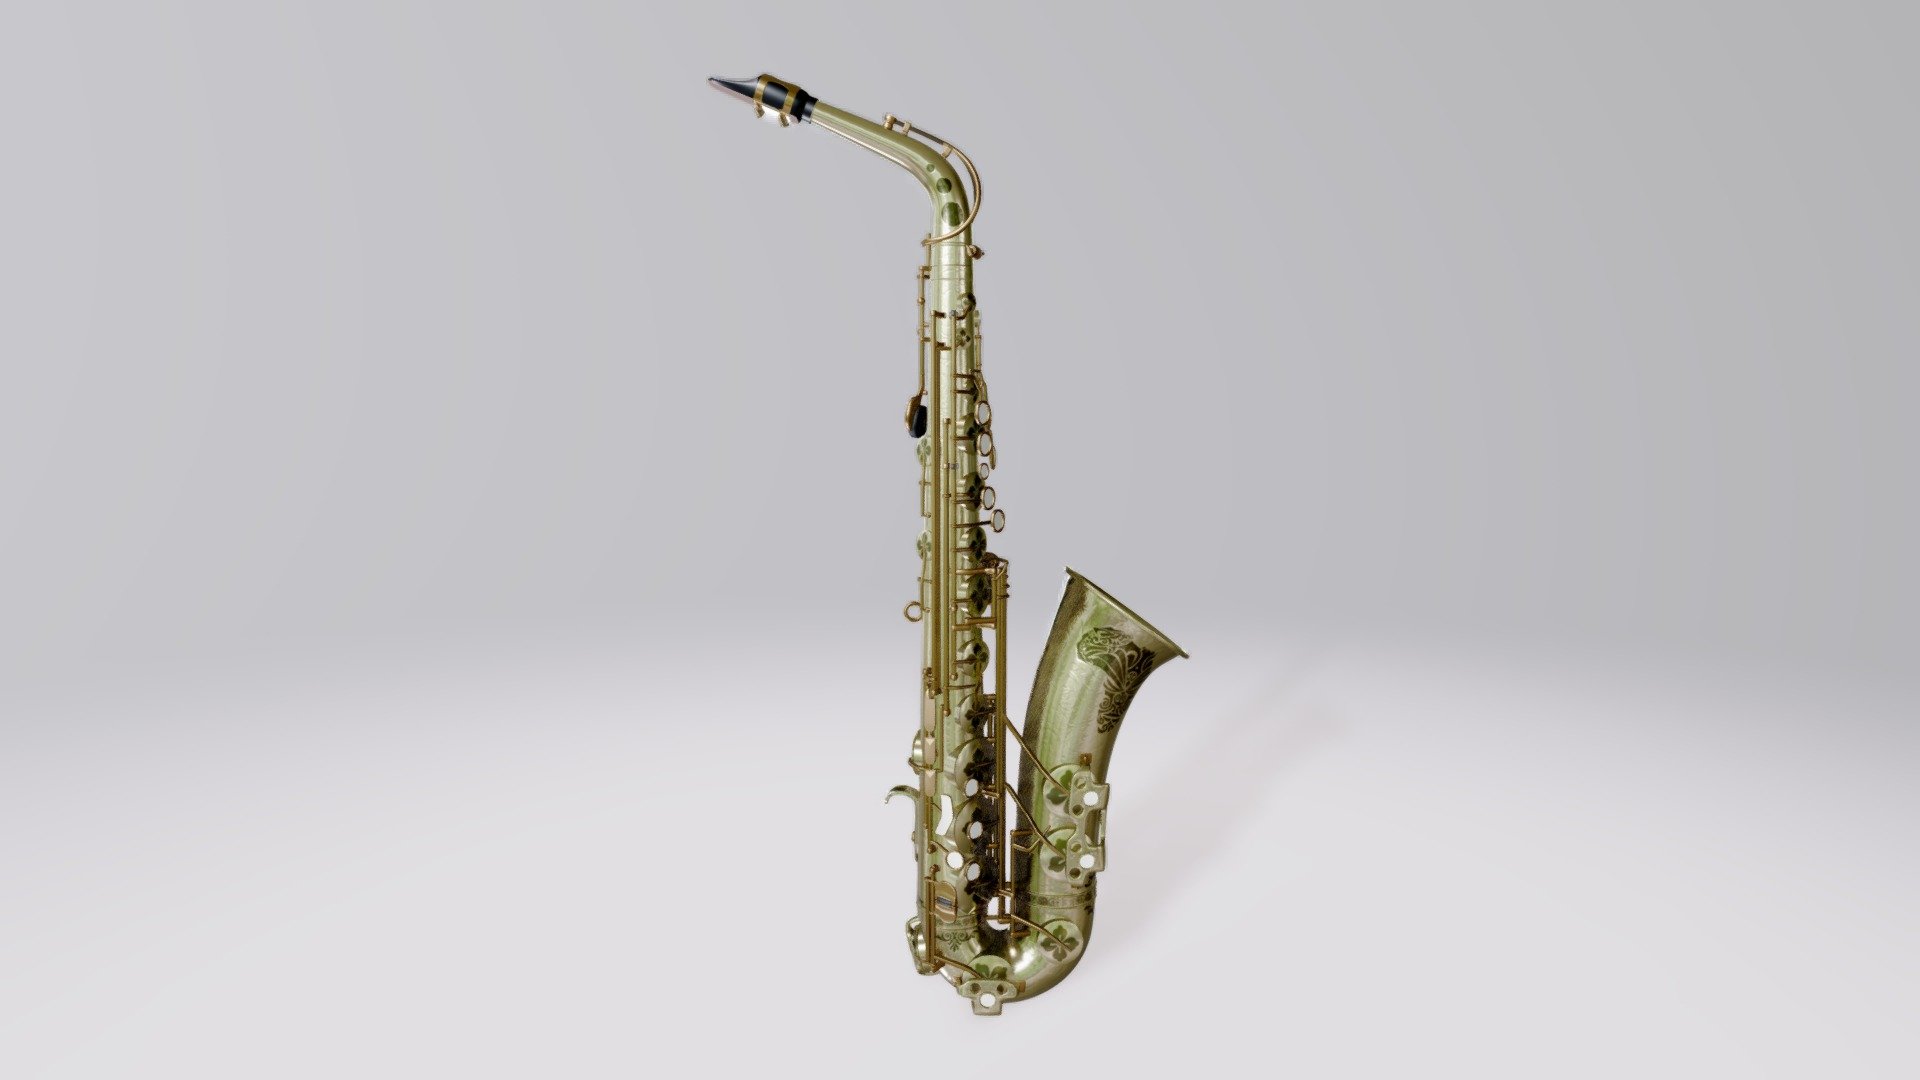 An alto saxophone of about 85% accuracy lol 3d model